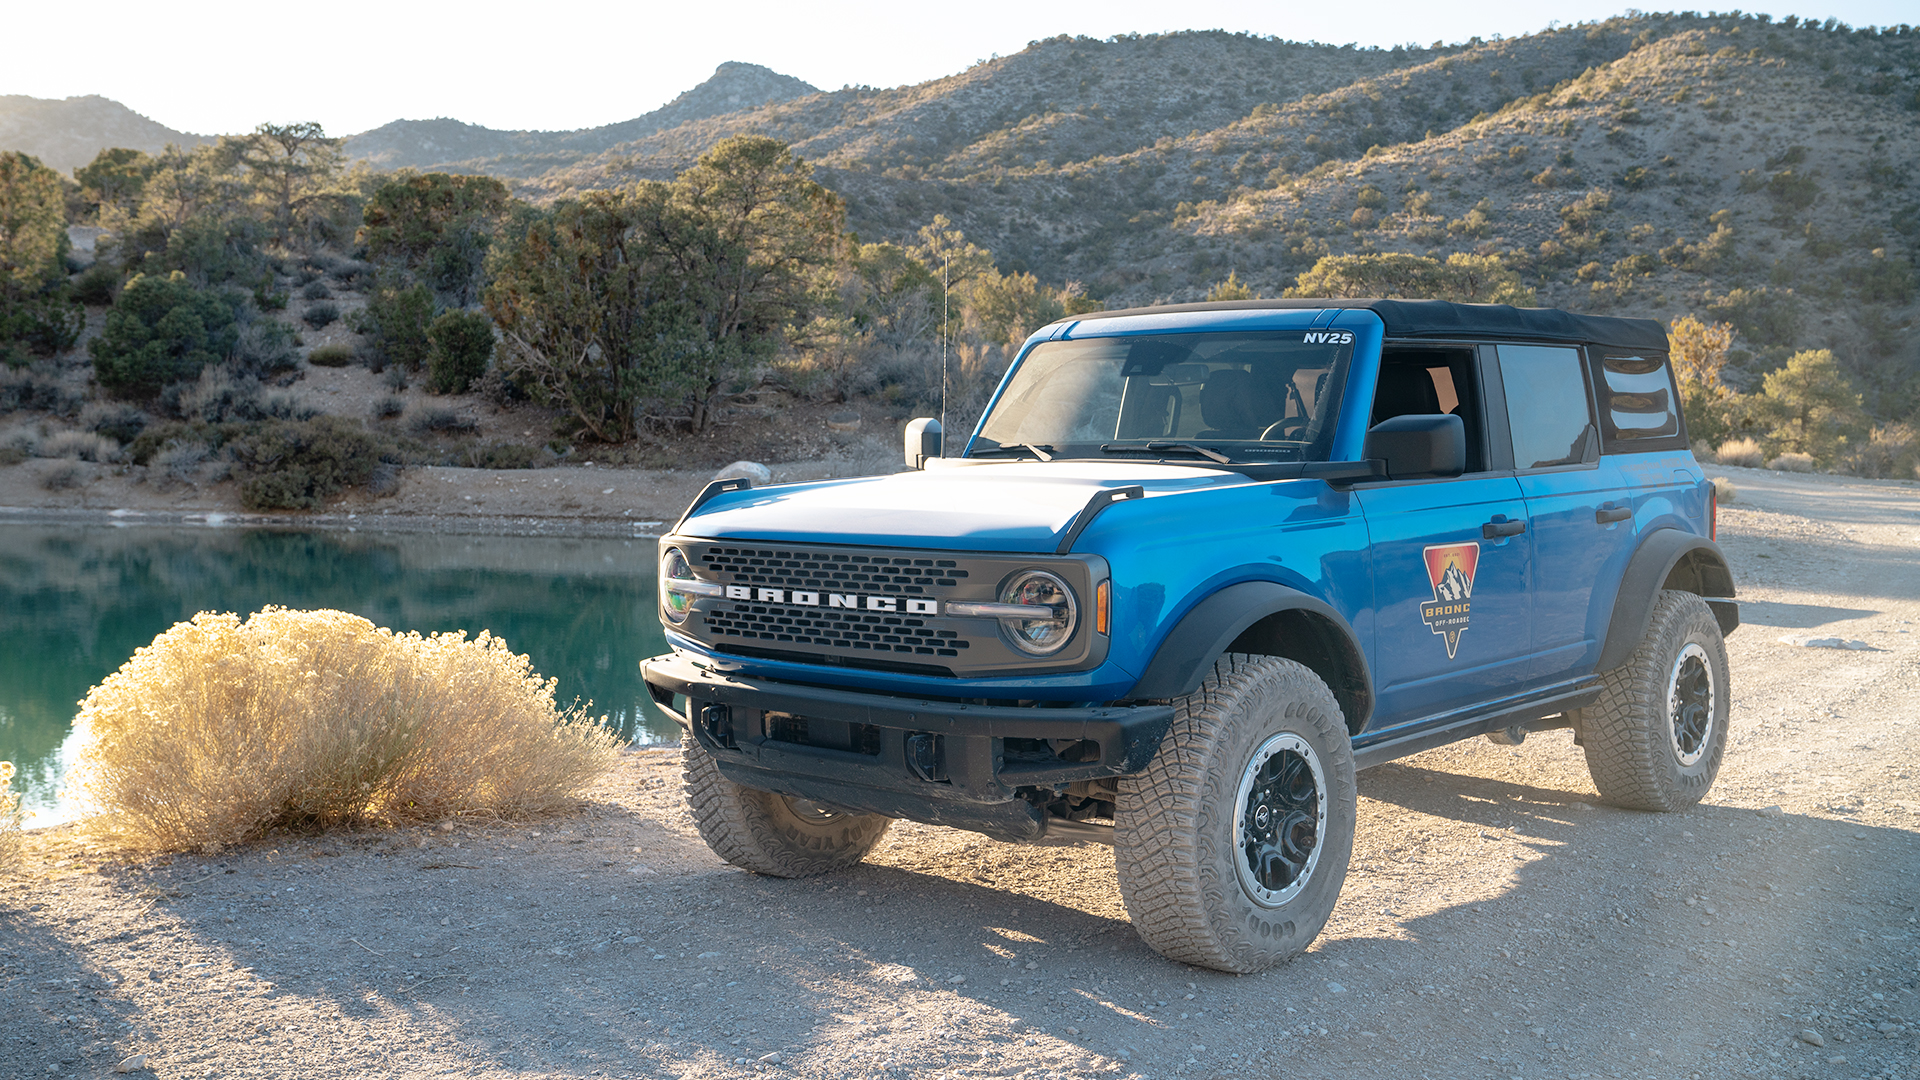 THe Bronco gets better in the backcountry.